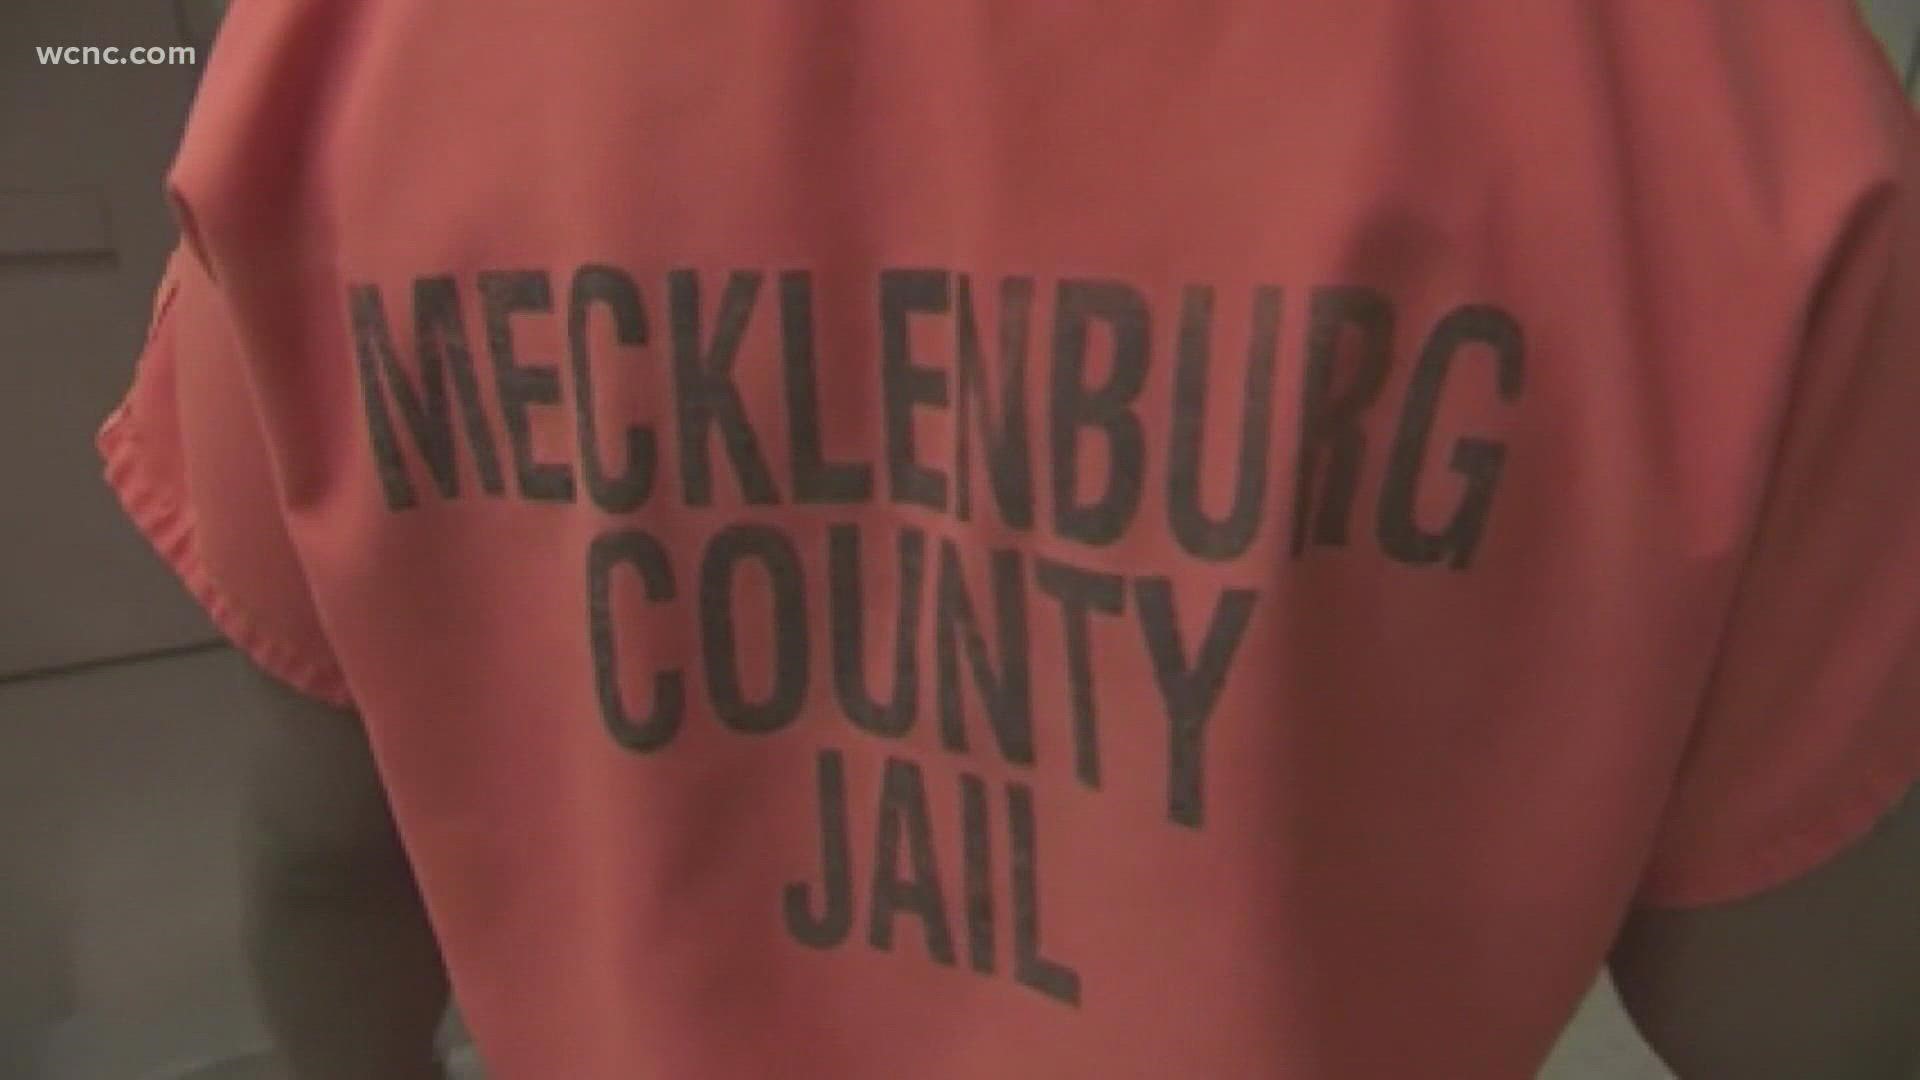 The sheriff's office said these are inmates who are facing criminal charges in counties other than Mecklenburg.